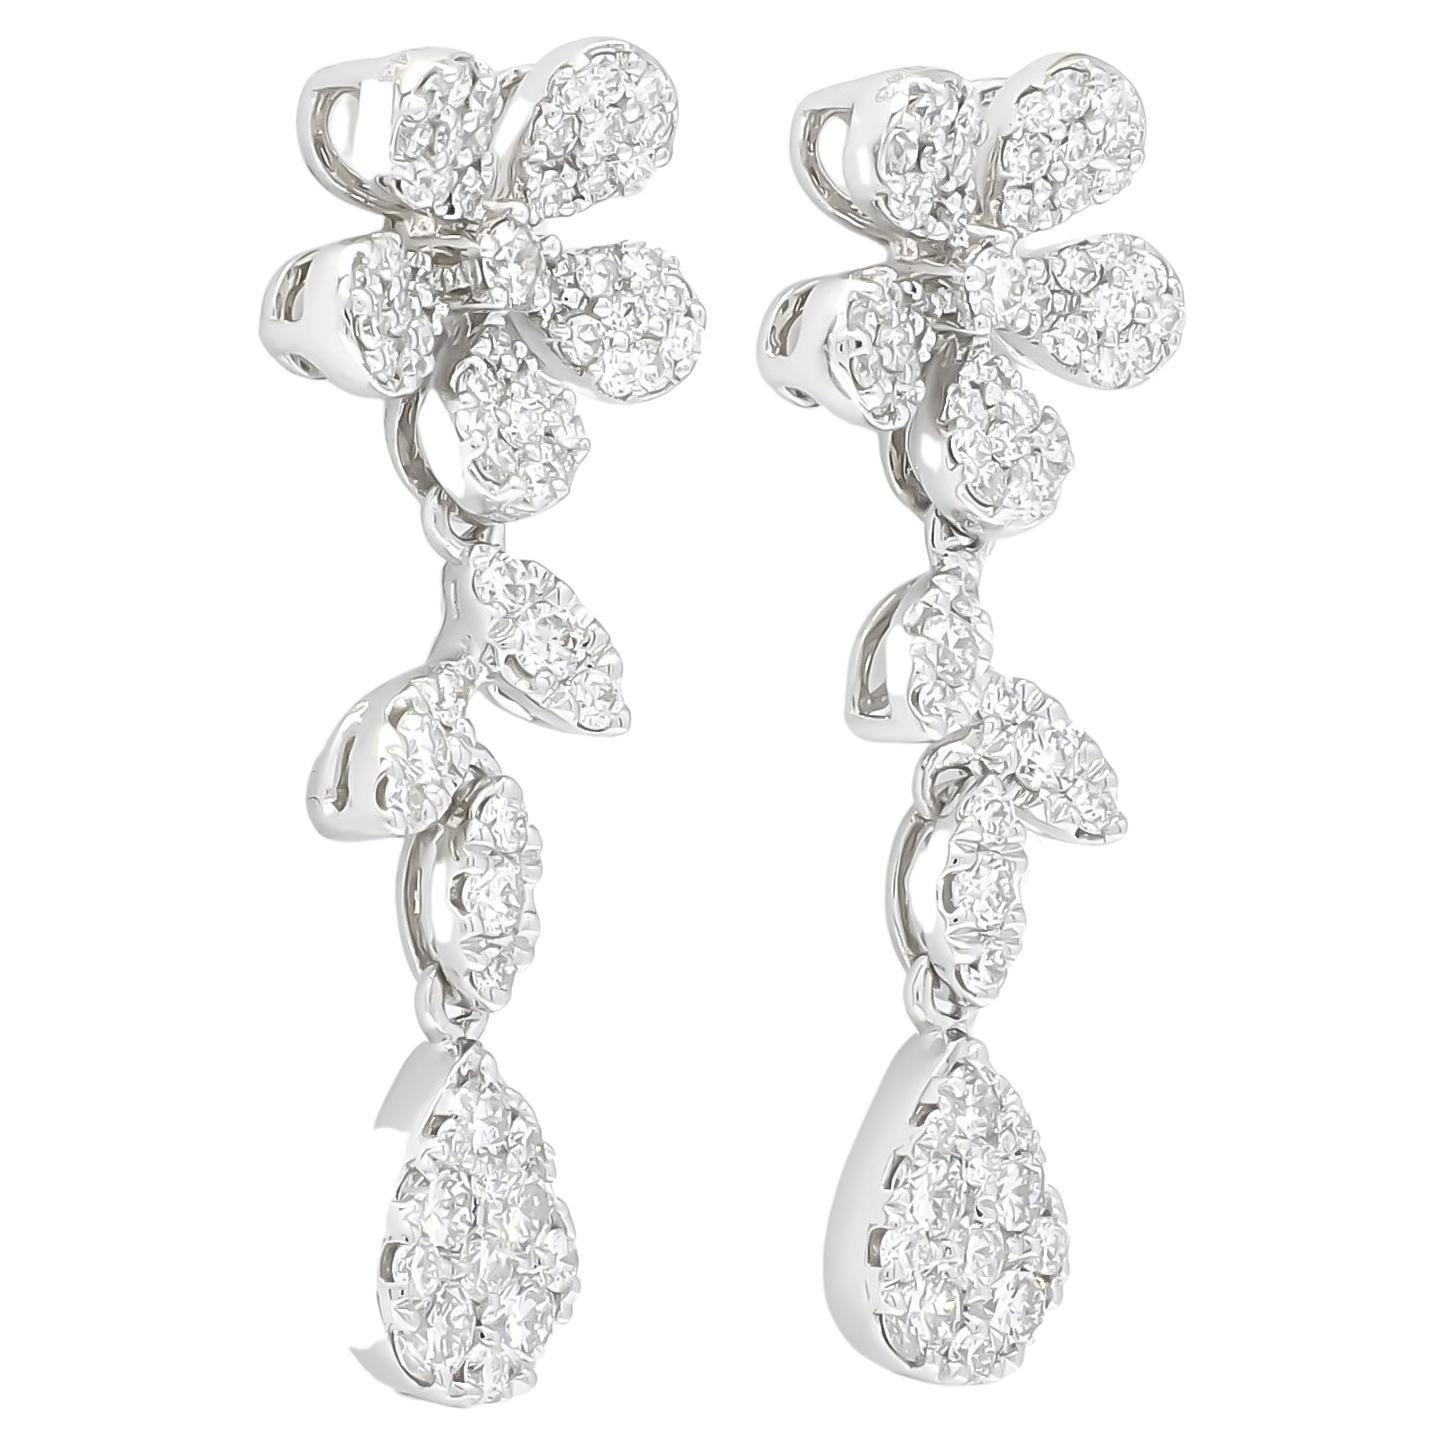 Get ready to embrace your inner flower power and shine with these sparkling round-shape diamond elongated cluster drop earrings set in 18k white gold. These earrings are the epitome of glamor, adorned with stunning flower and leaf-inspired diamond